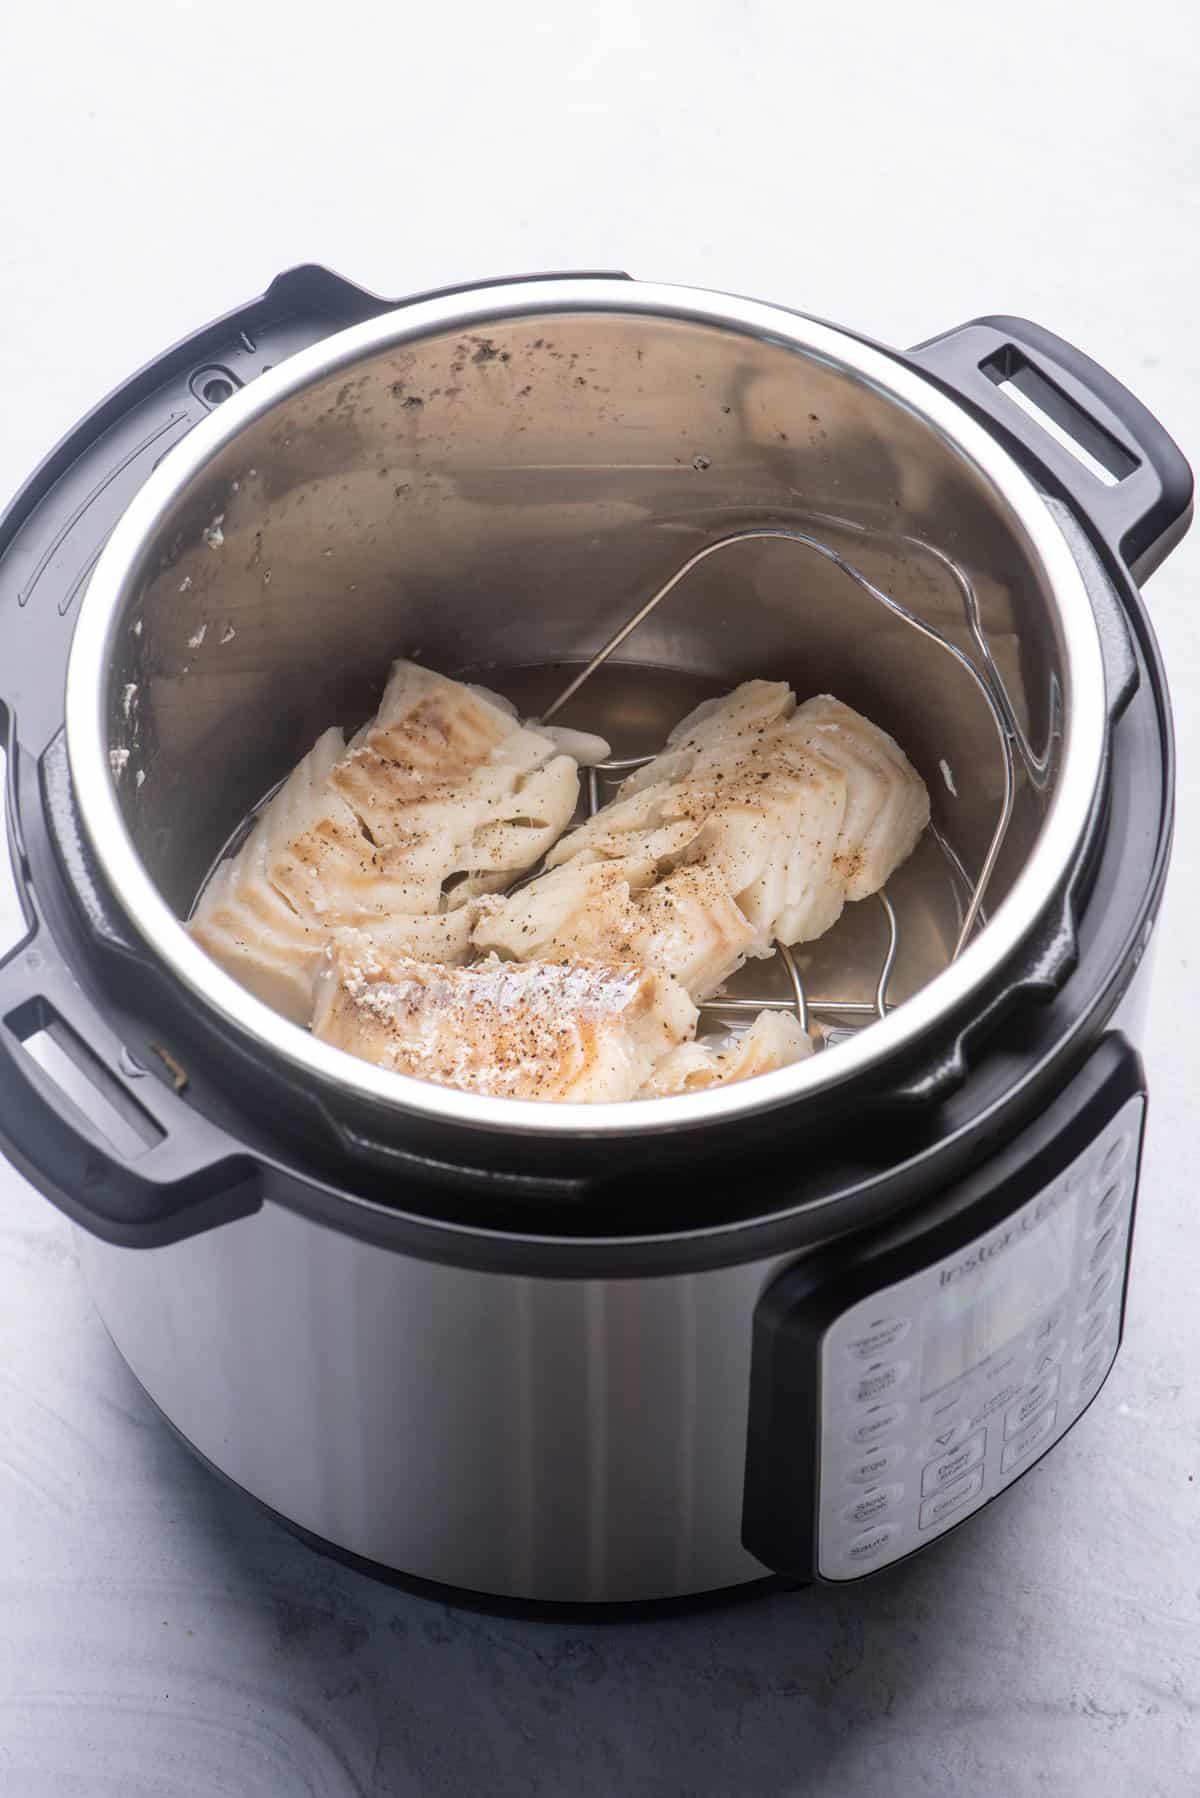 Cooked fish in instant pot